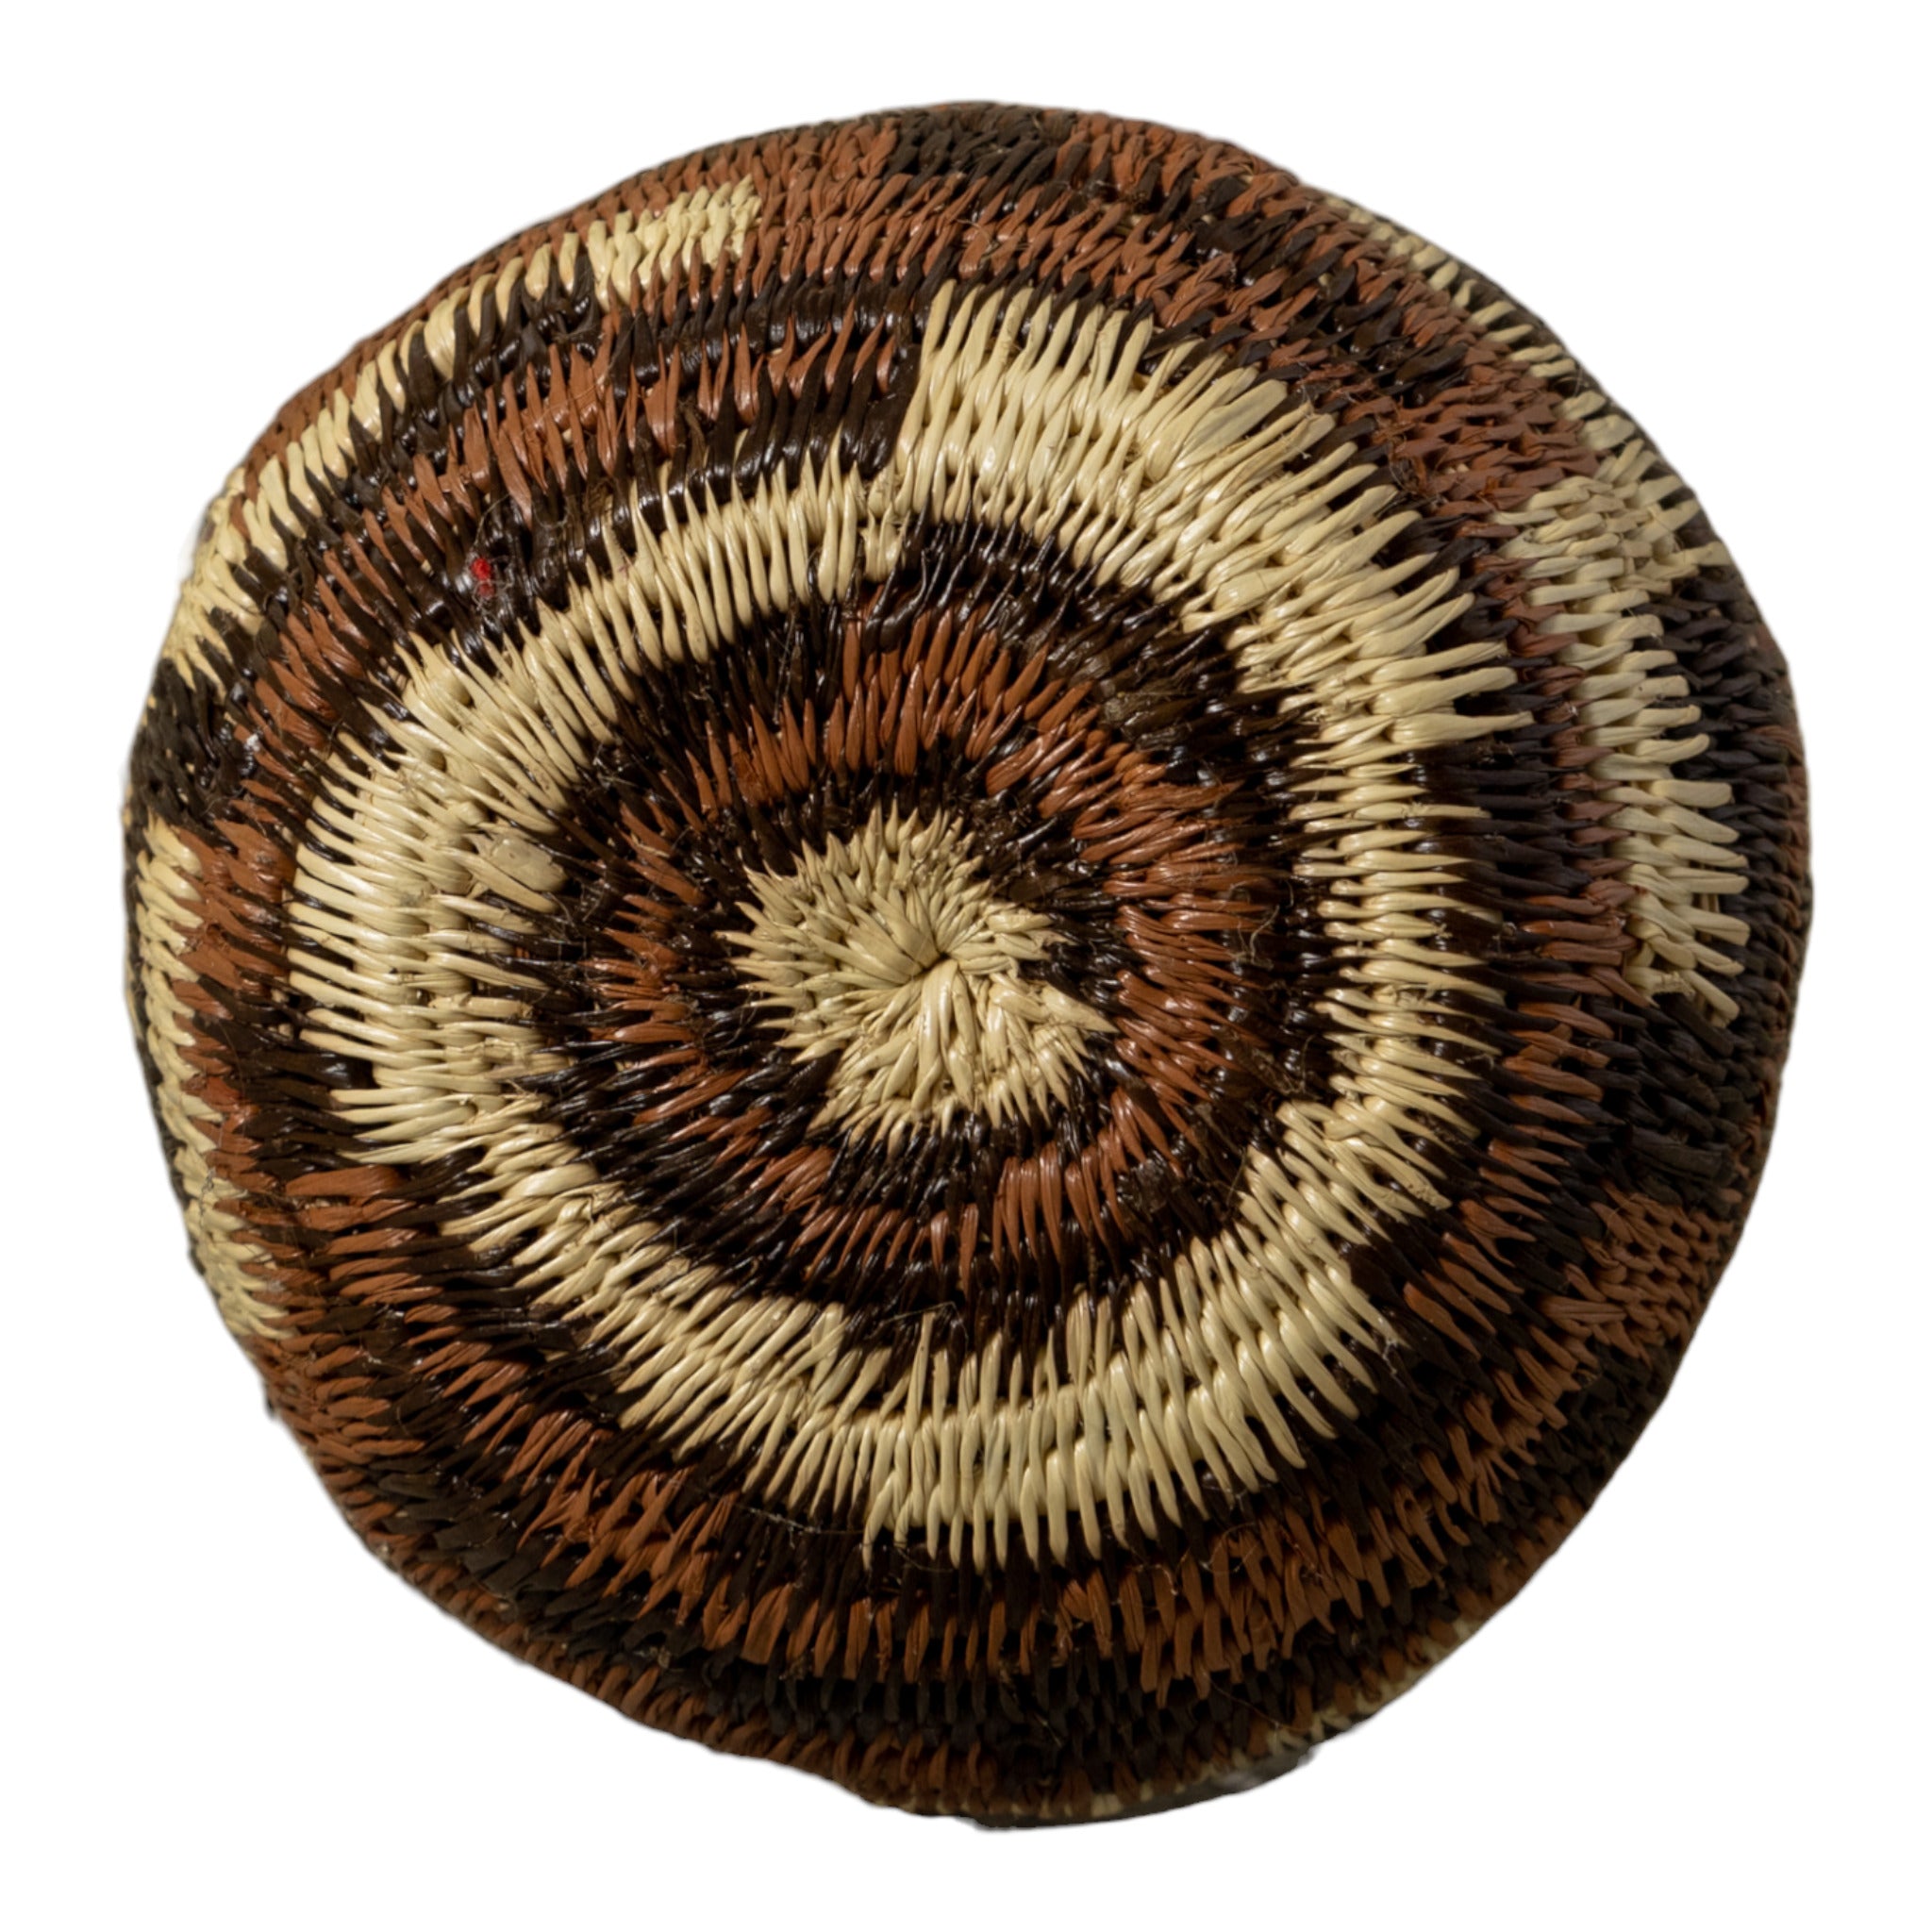 Small ZigZag Brown White And Black Rainforest Basket